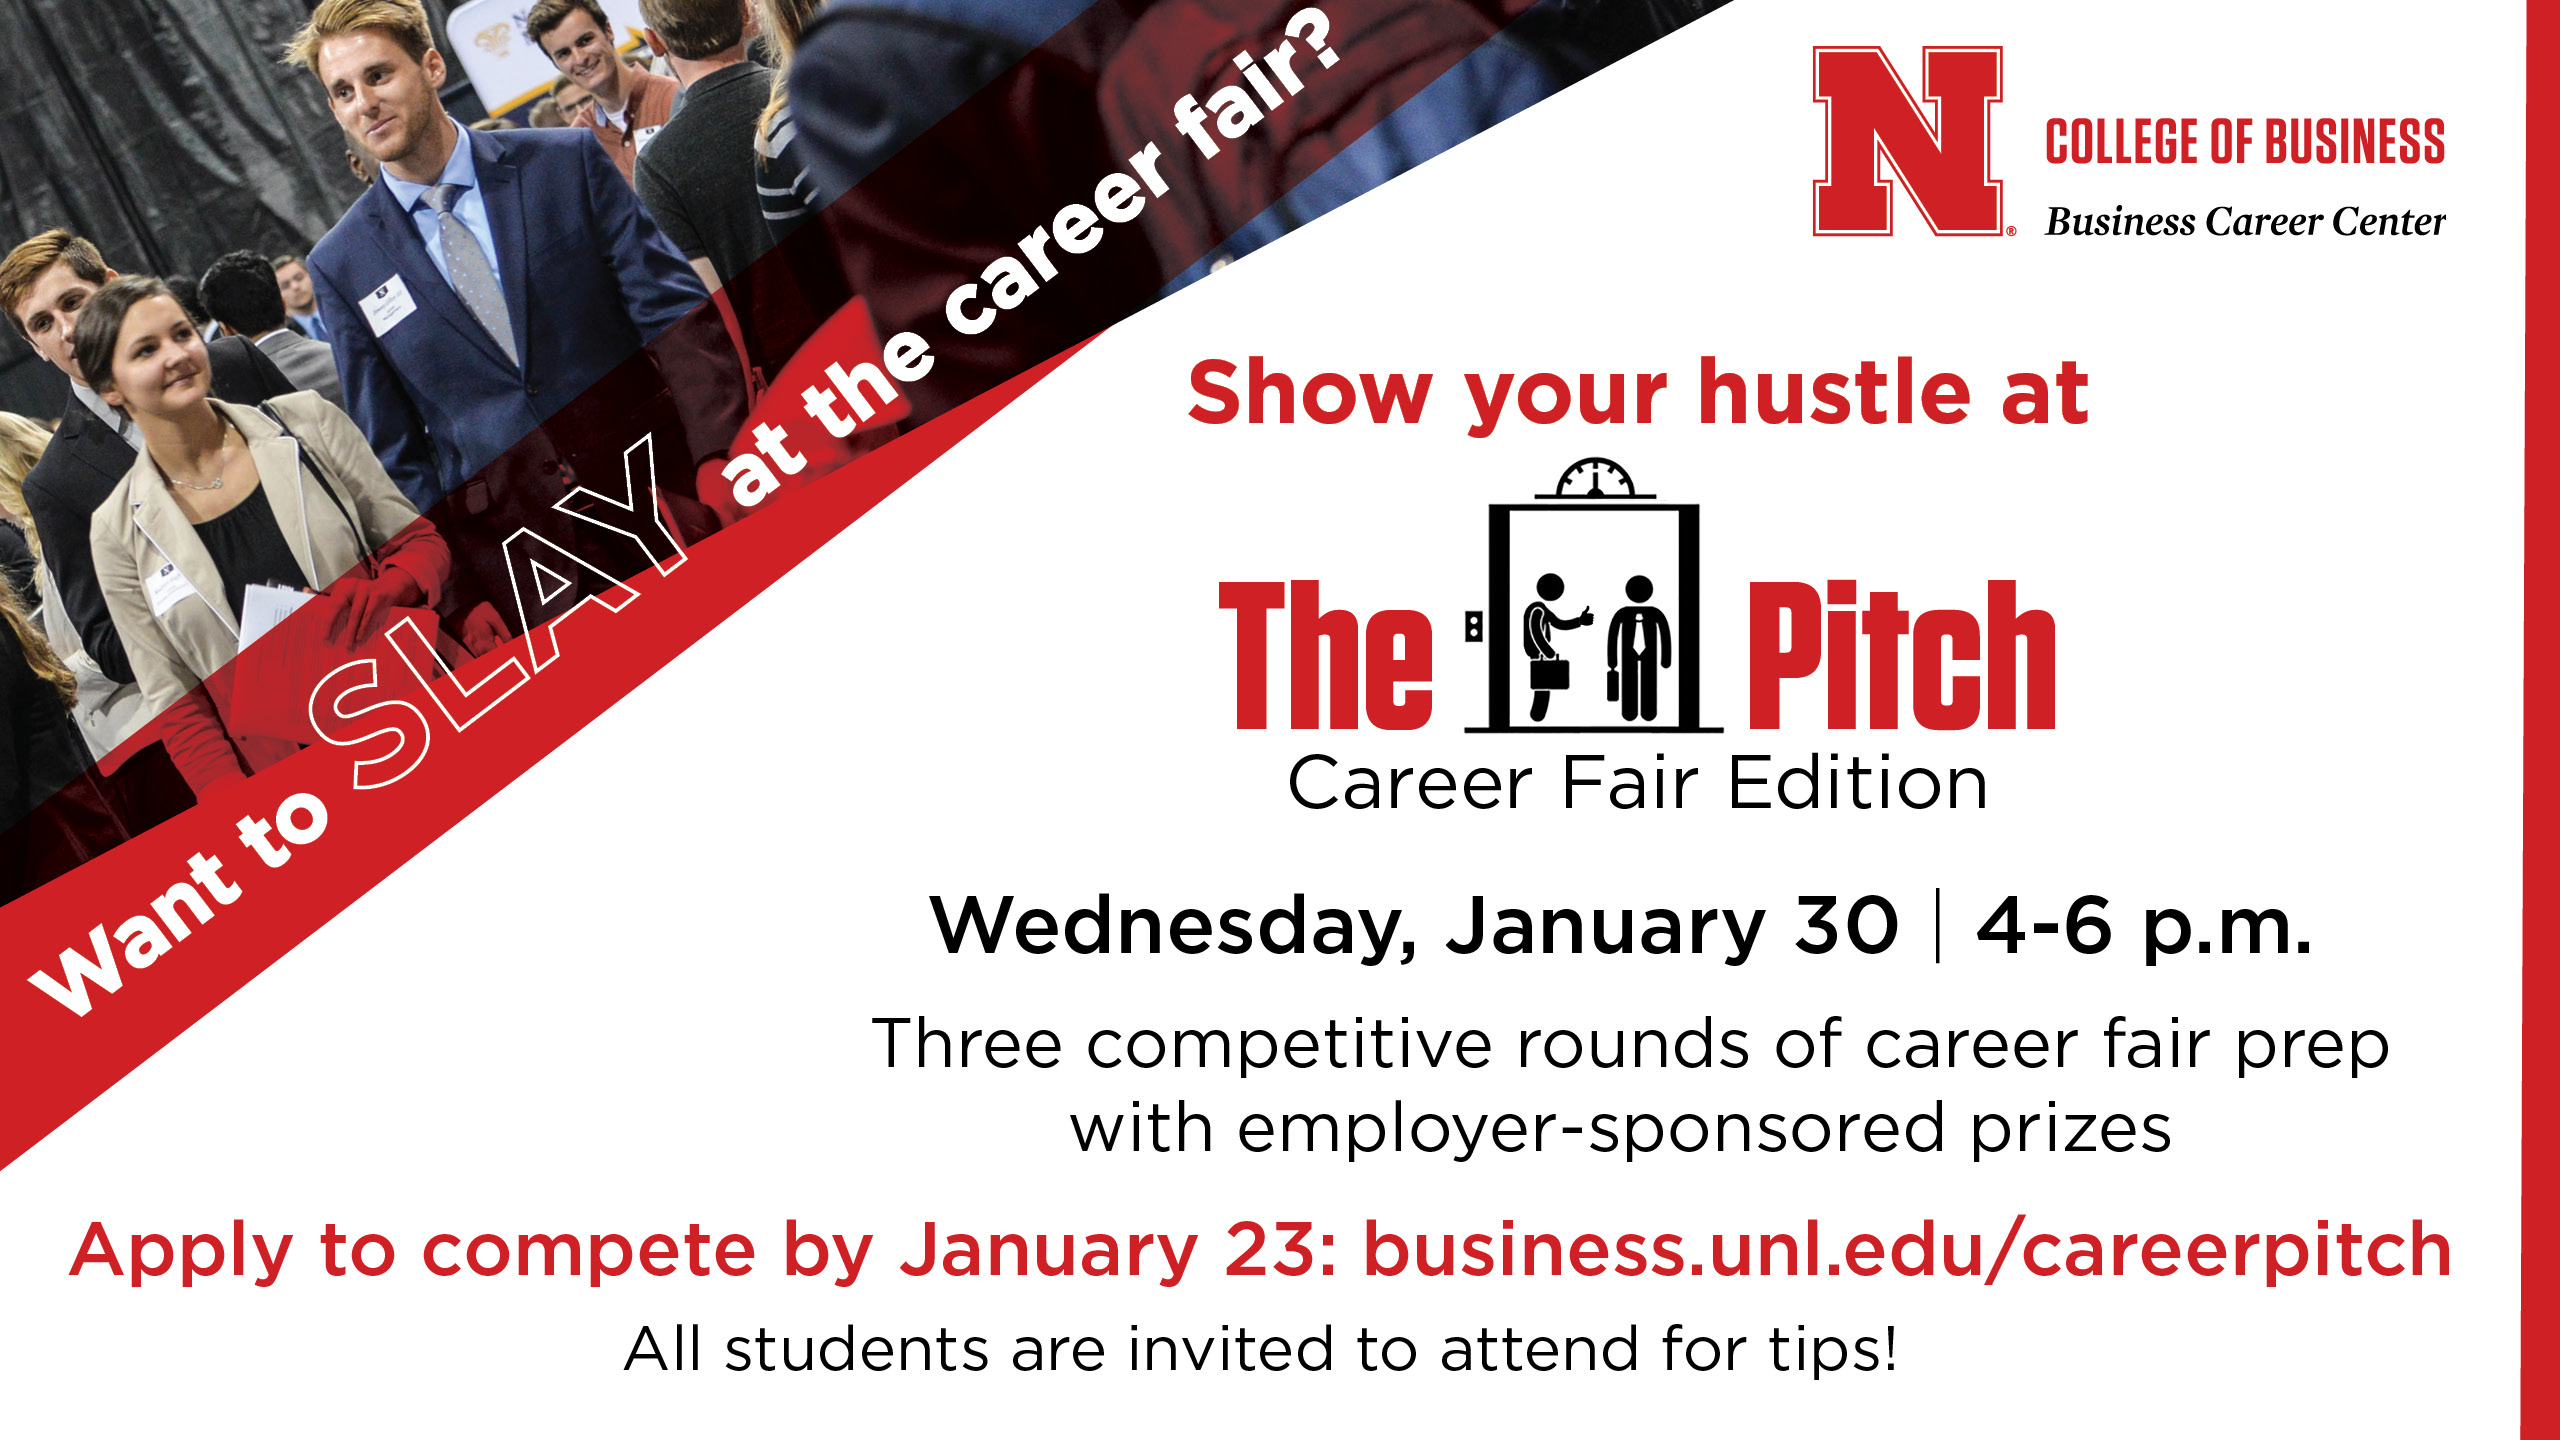 The Pitch Career Fair Edition Application is Due Jan. 23.